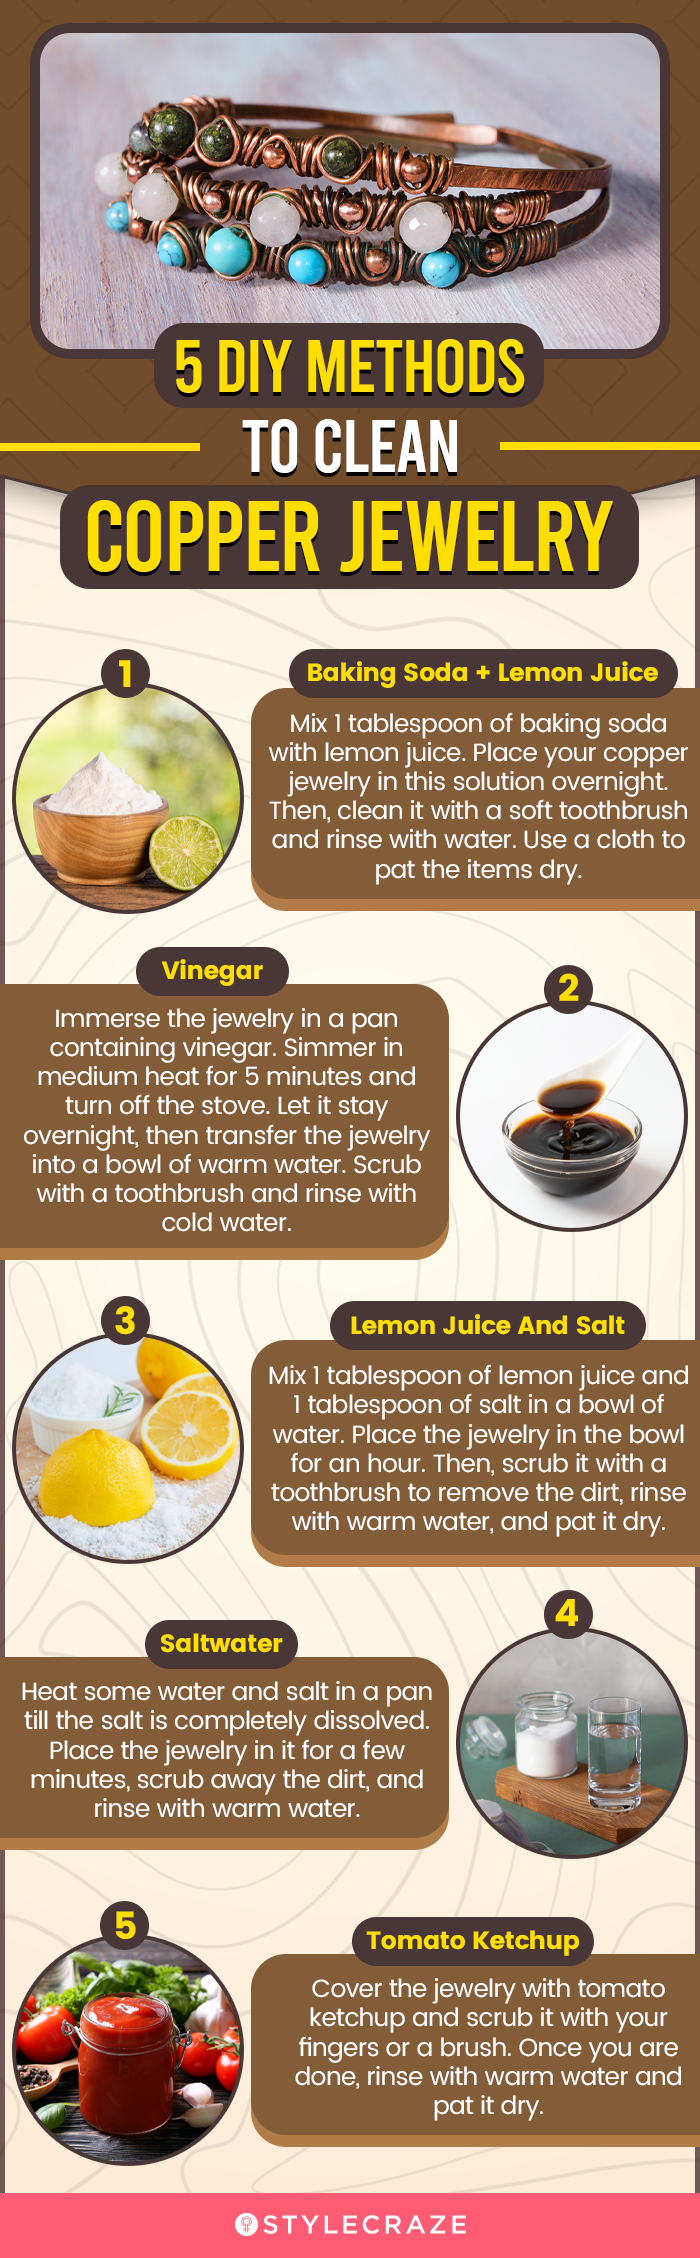 5 diy methods to clean copper jewelry (infographic)